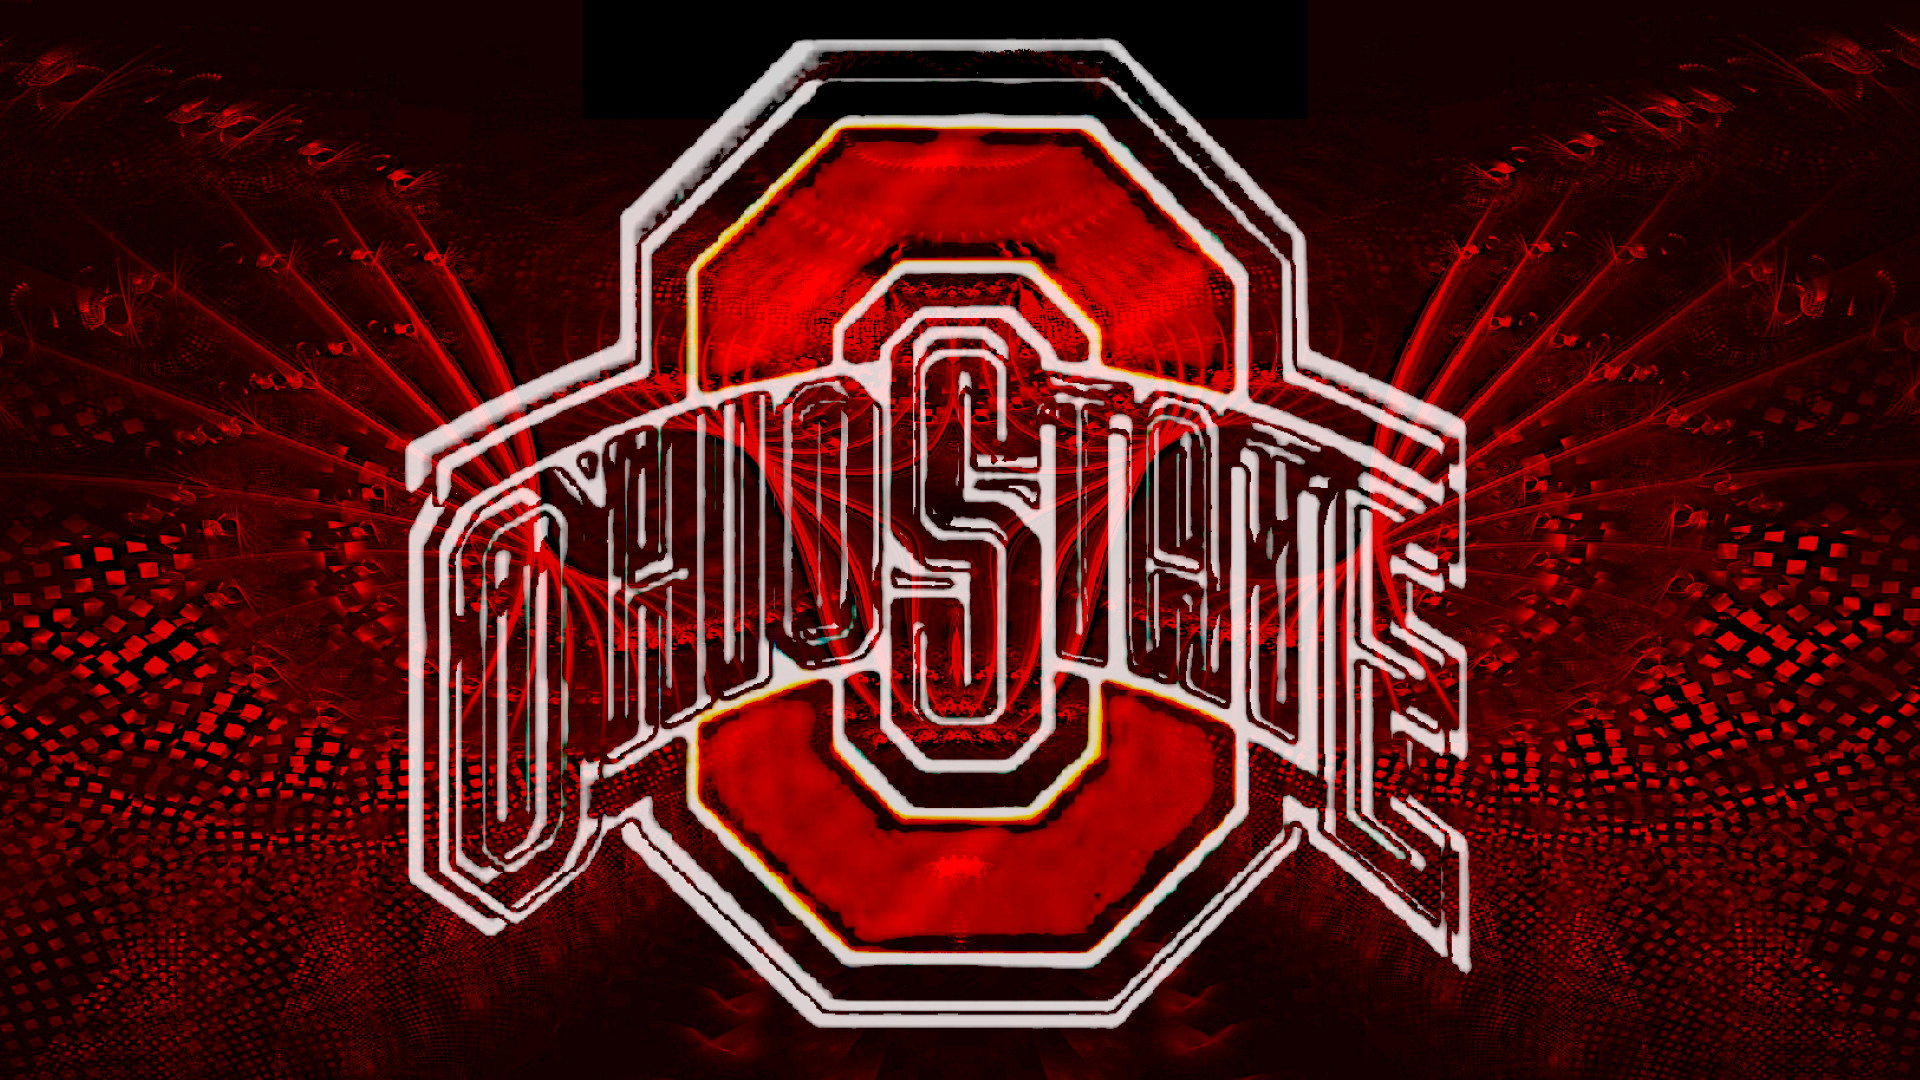 1920x1080 Ohio State Football Wallpaper | HD Wallpapers | Pinterest | Wallpaper and Hd  wallpaper